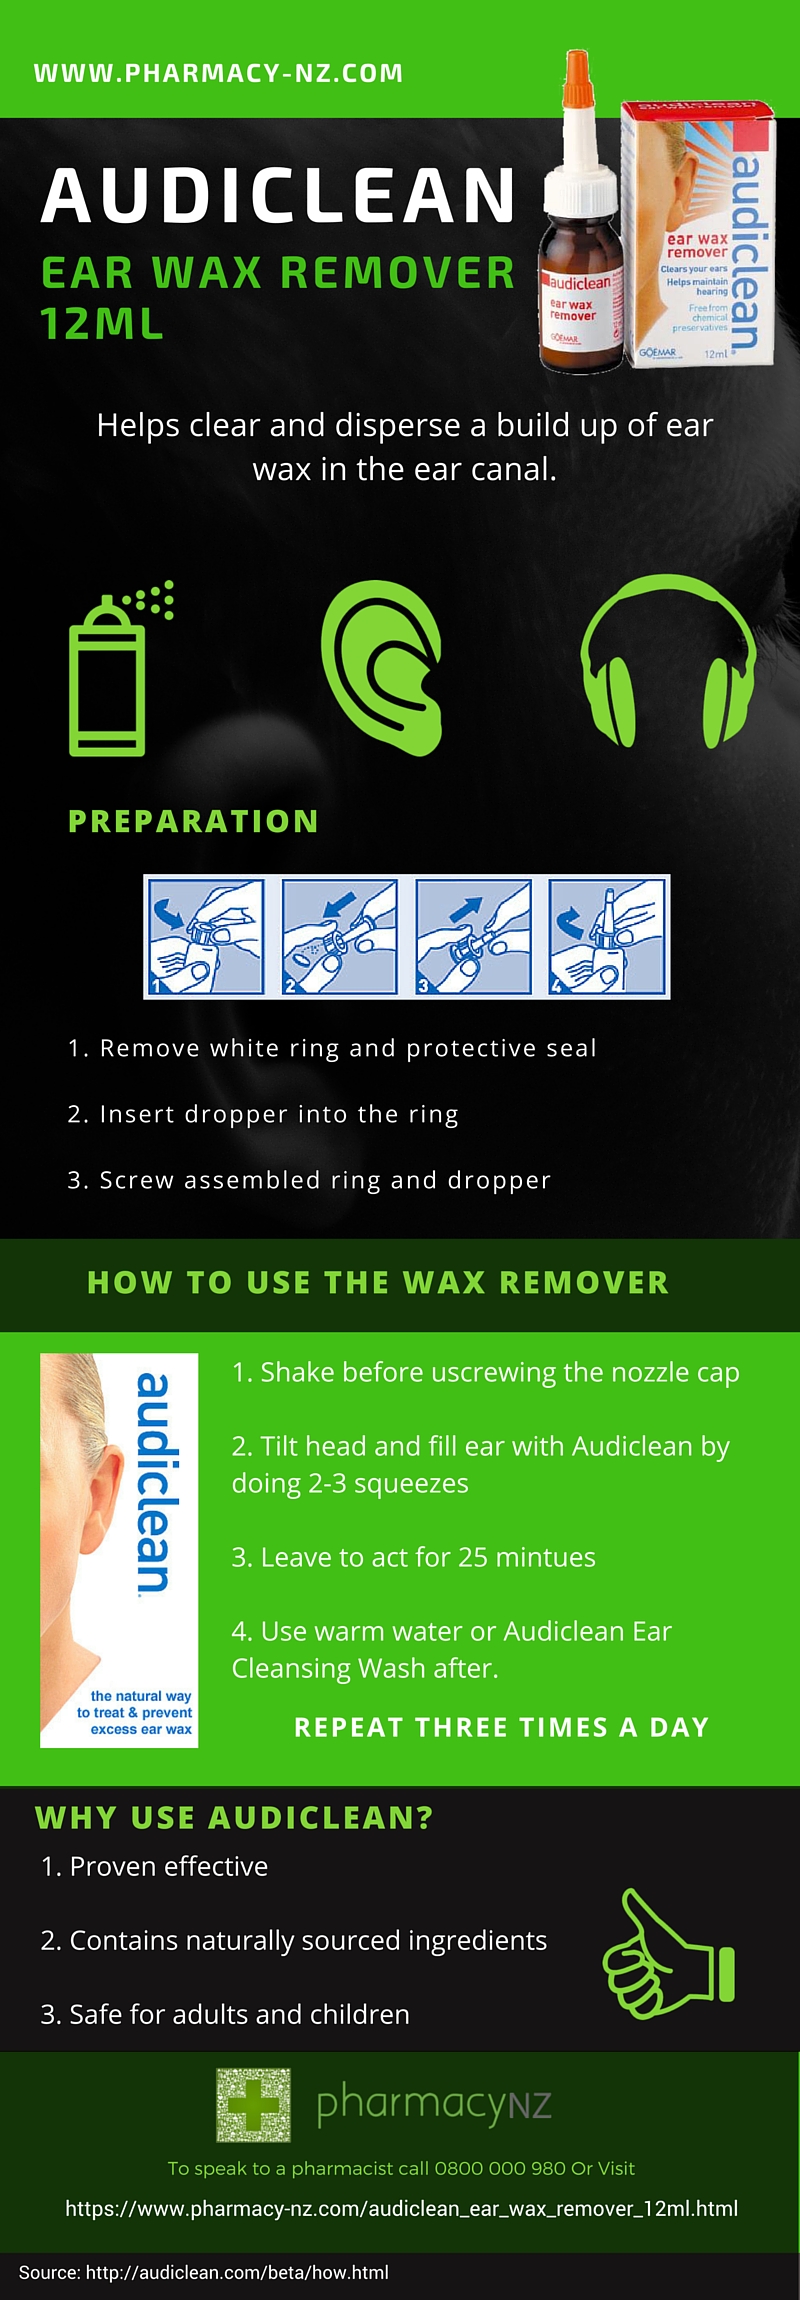 PNZ AUDICLEAN EARWAX REMOVER